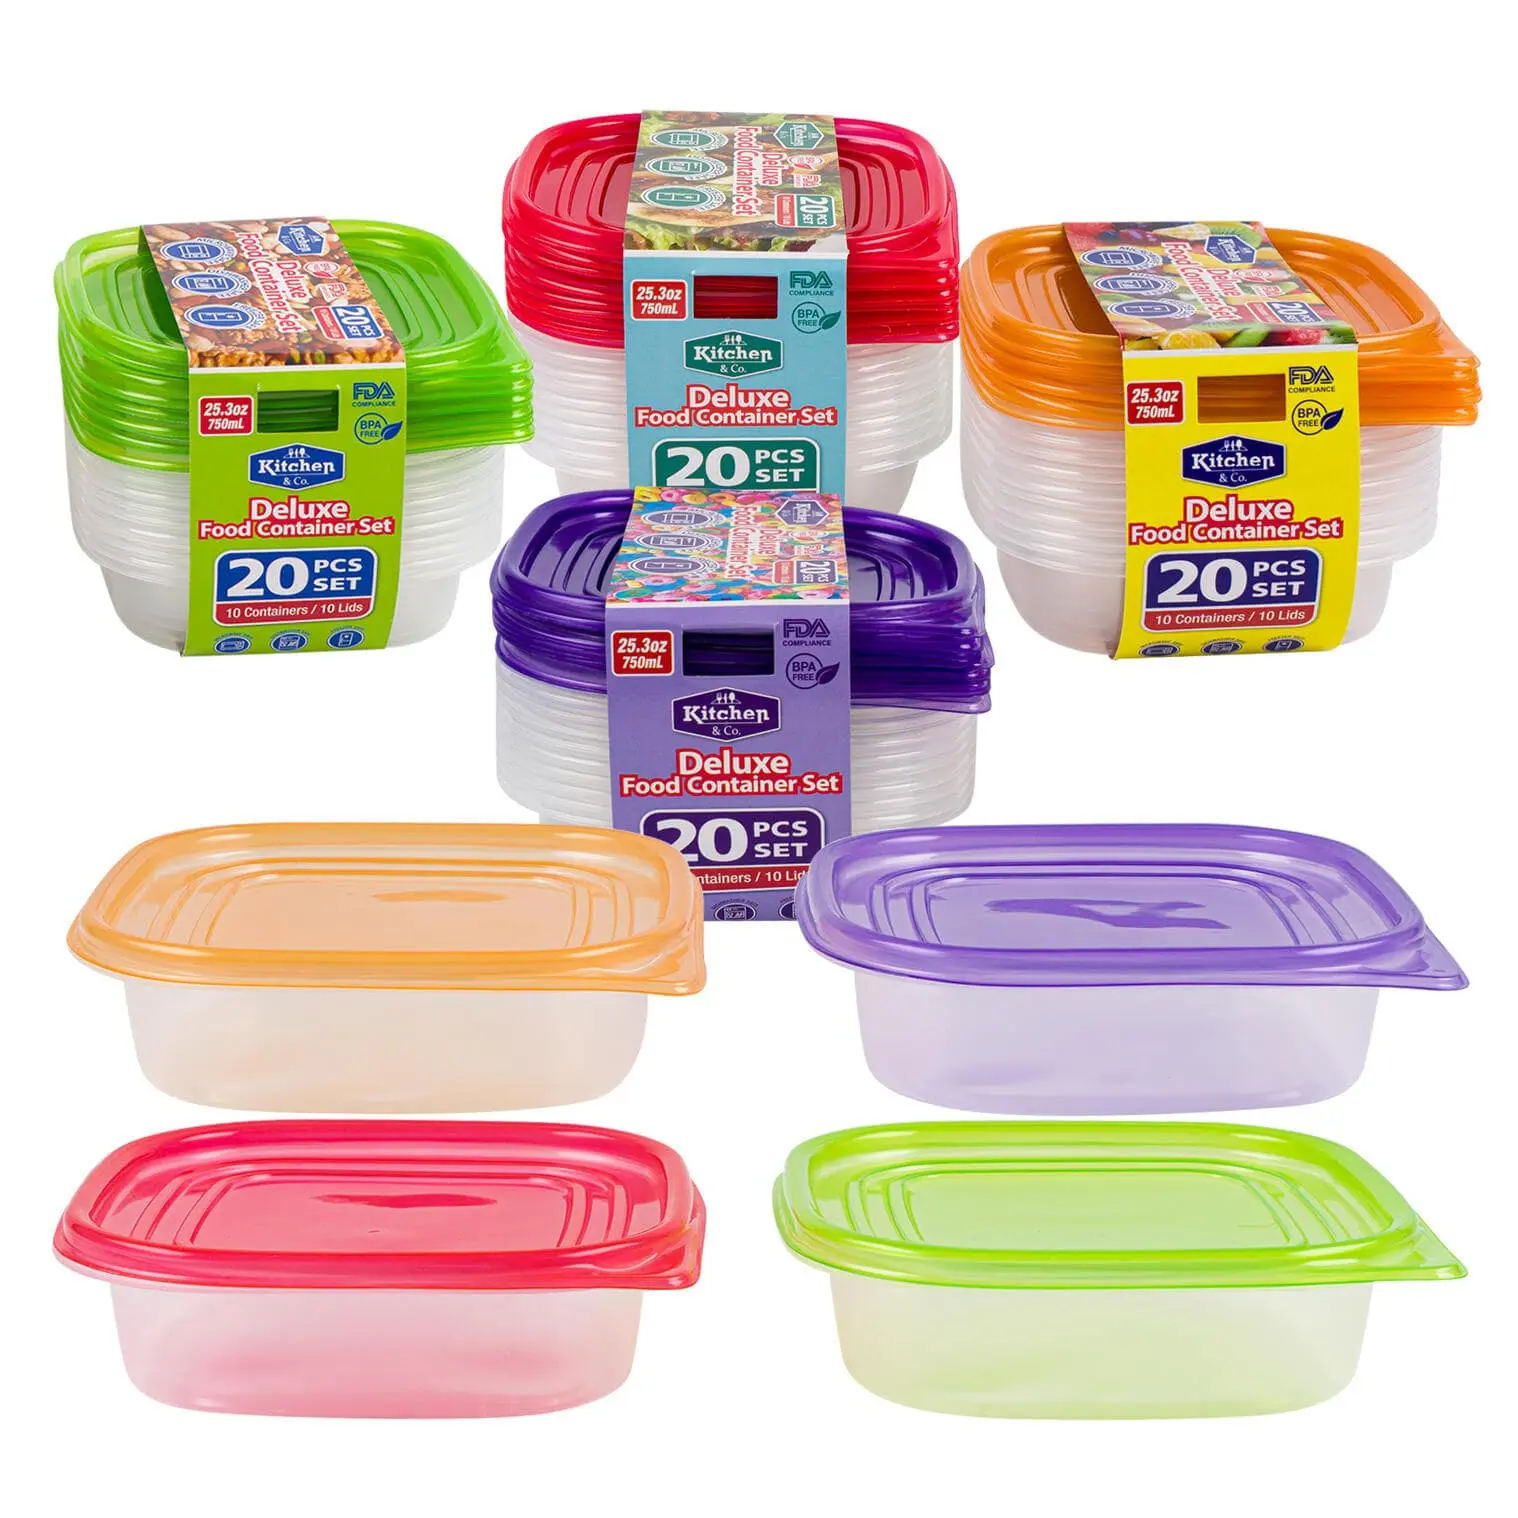 20pc 25.3oz Shallow Food Container Set - The CEO Creative